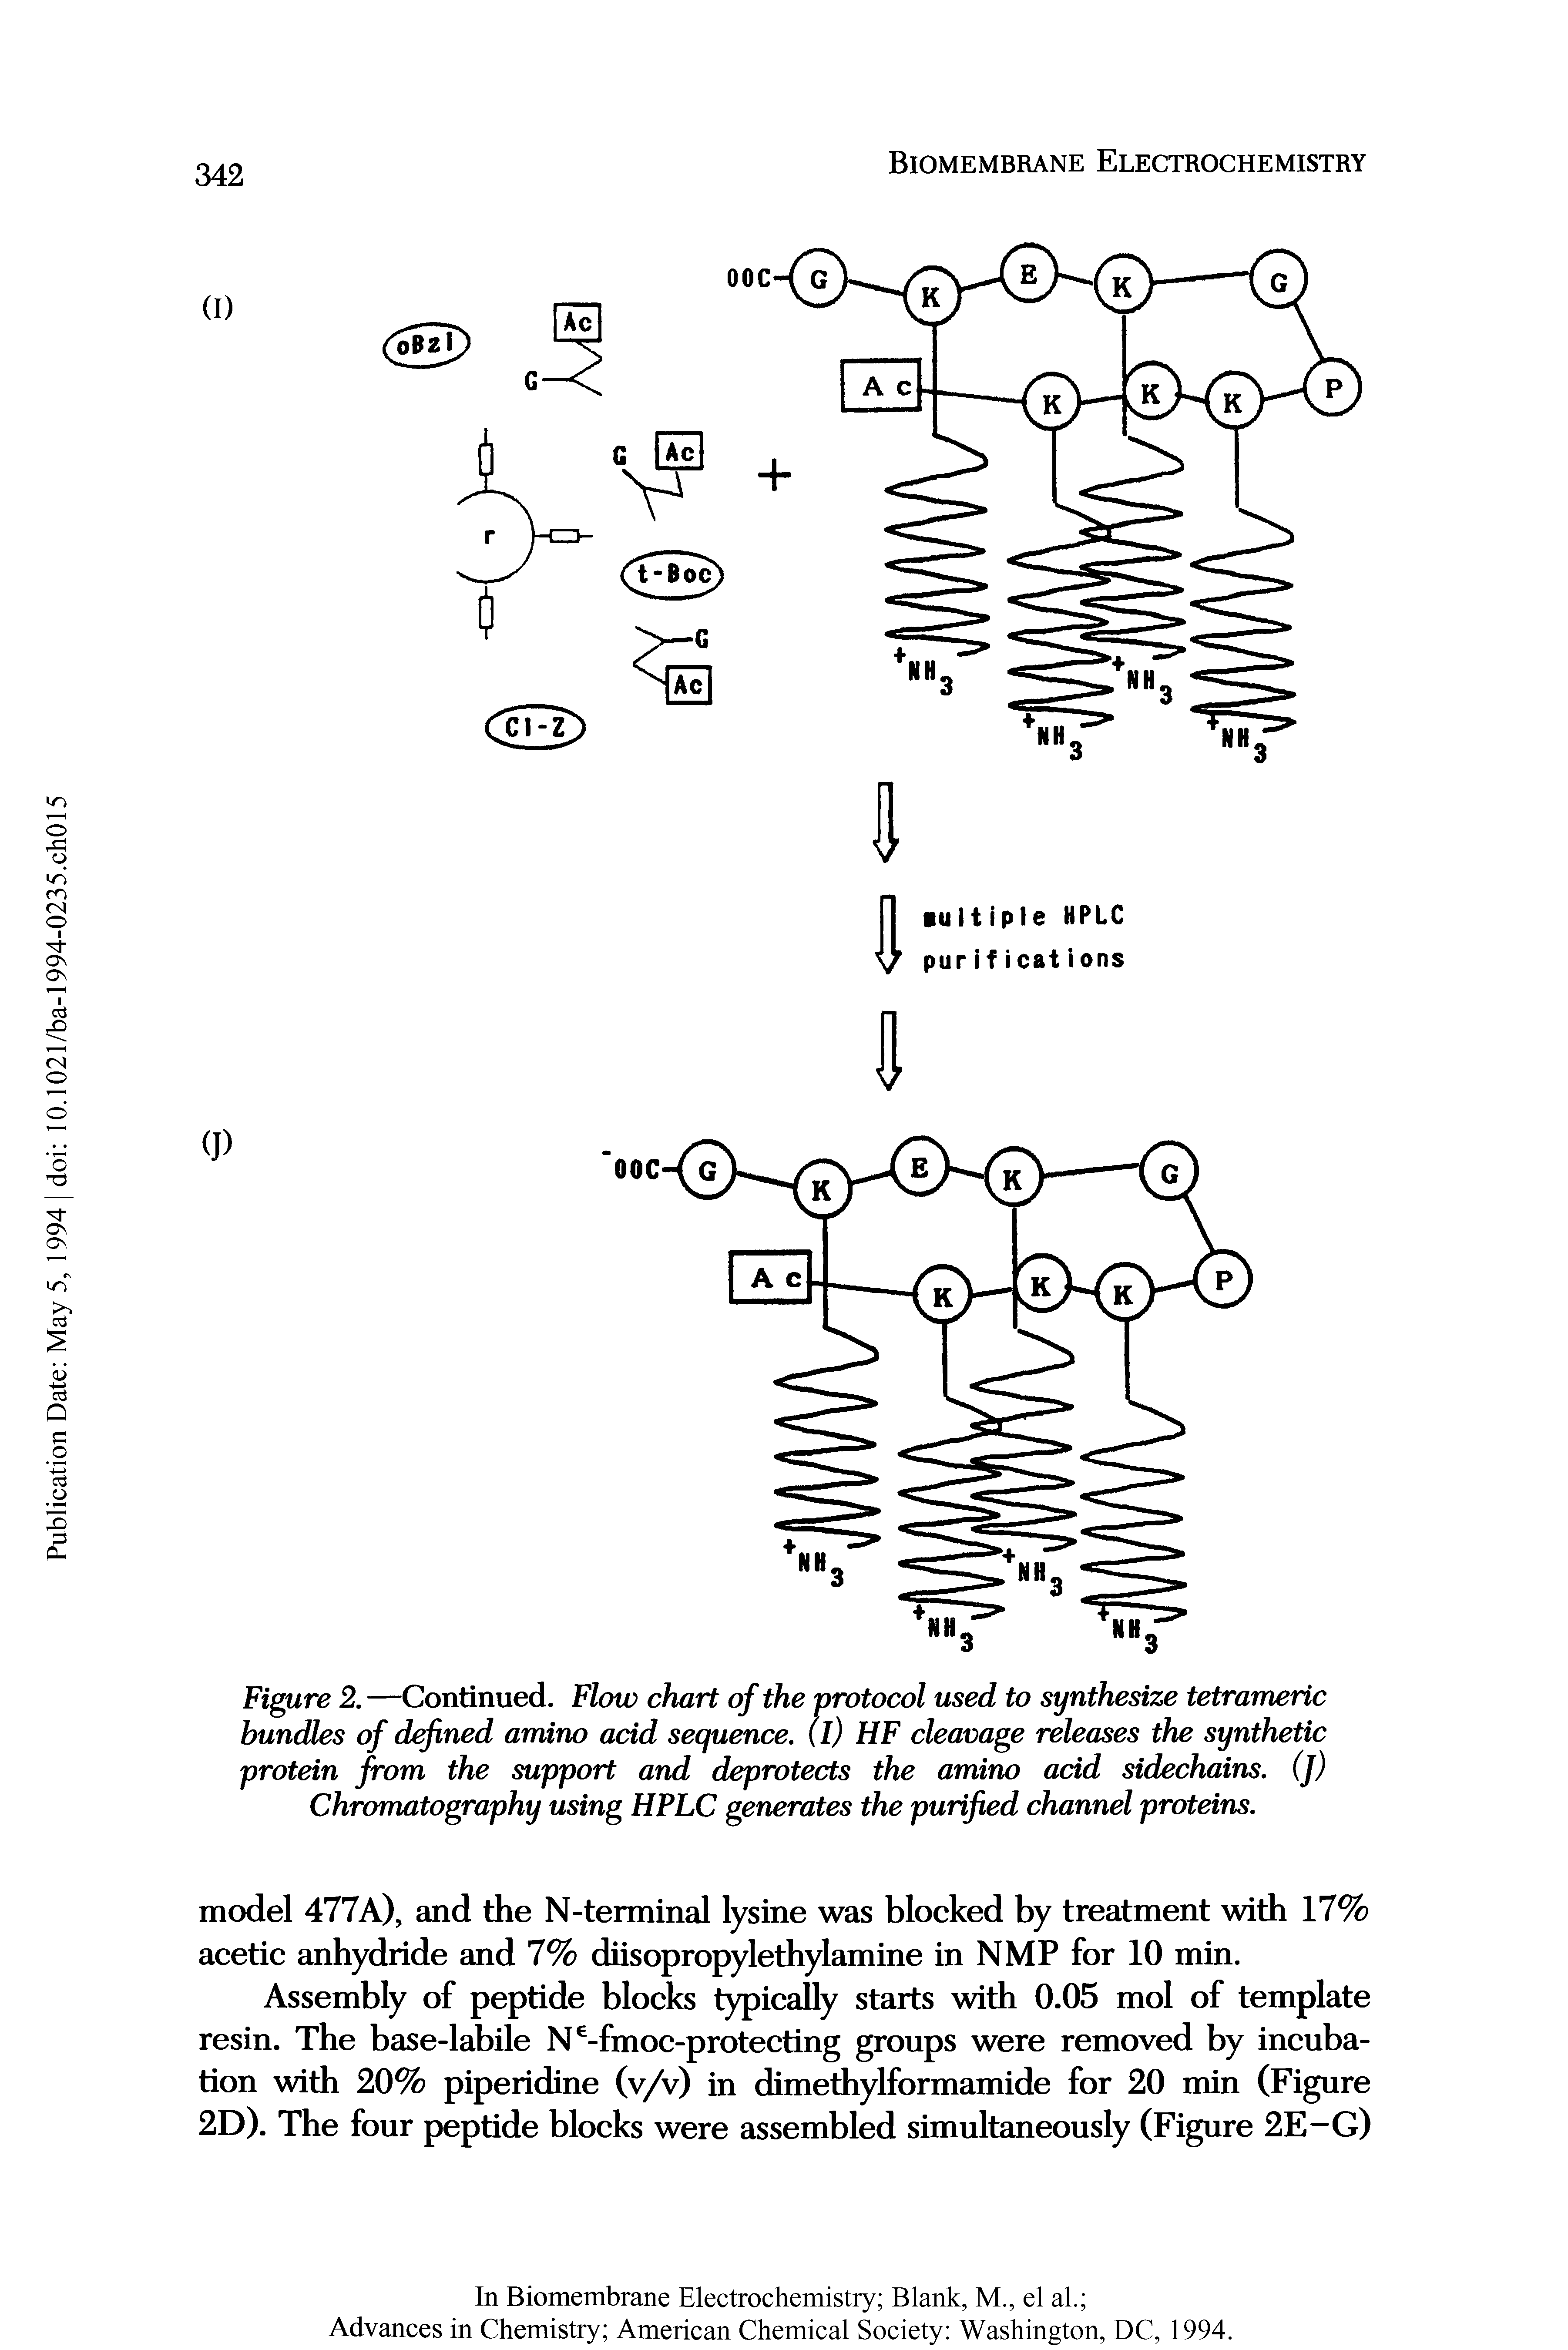 Figure 2. —Continued. Flow chart of the protocol used to synthesize tetrameric bundles of defined amino acid sequence. (I) HF cleavage releases the synthetic protein from the support and deprotects the amino acid sidechains. (]) Chromatography using HPLC generates the purified channel proteins.